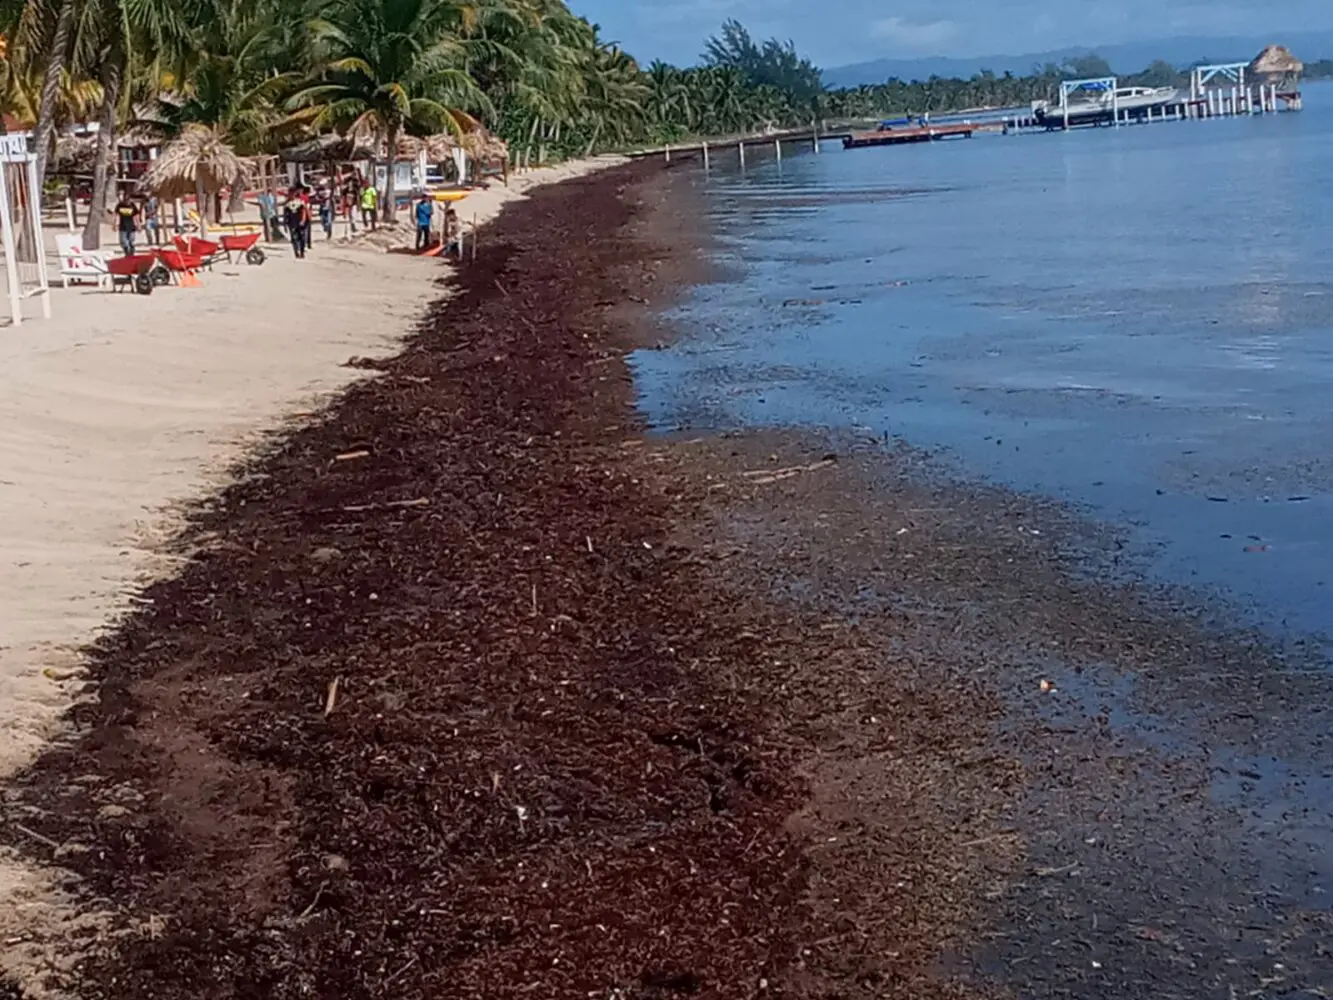 Sargassum seaweed threatens beaches along the Caribbean Sea in Belize and Mexico